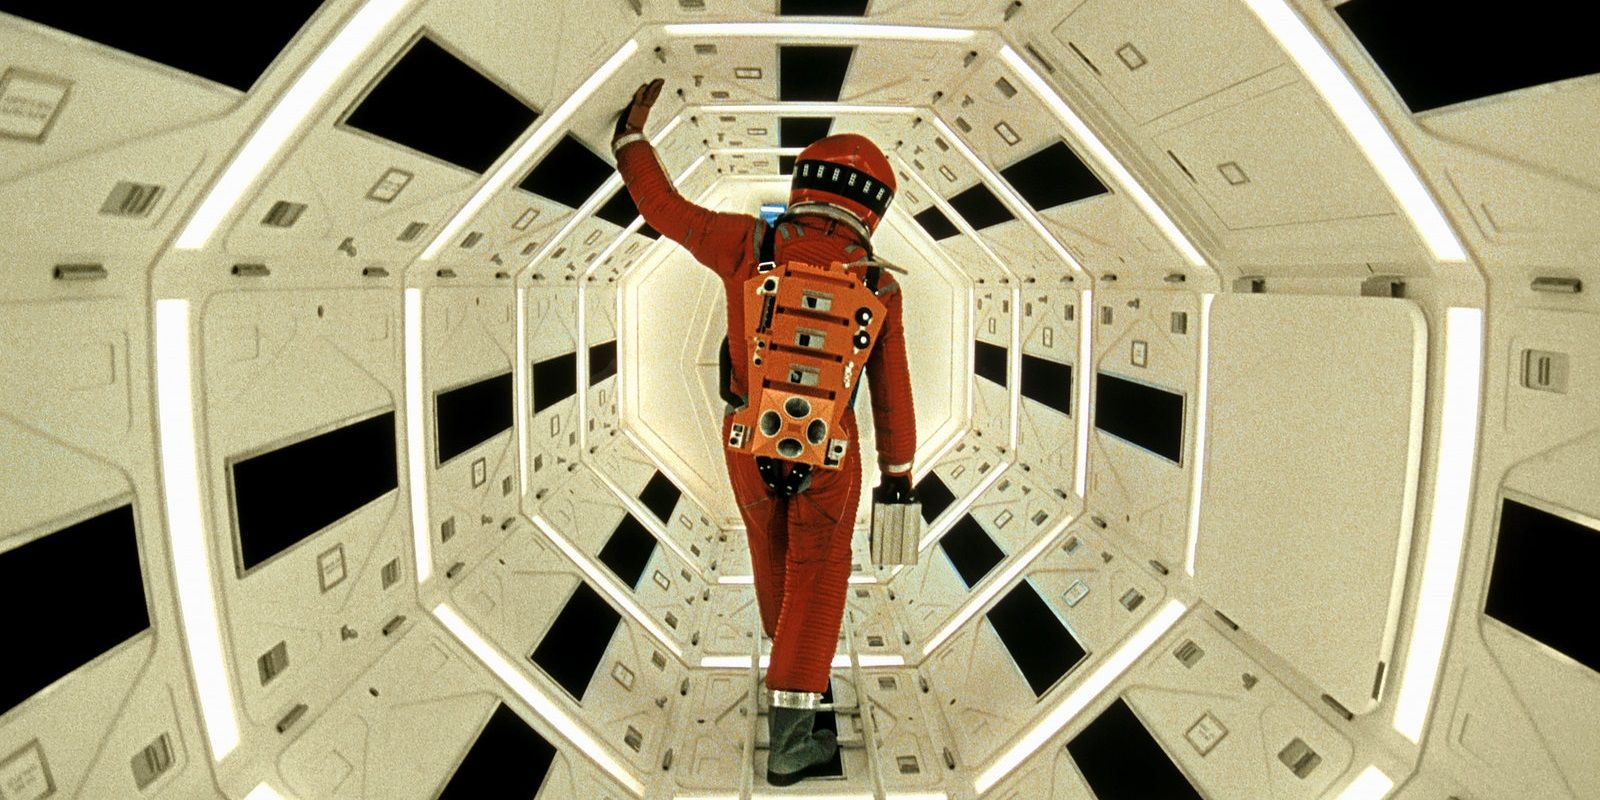 An astronaut moving through a tunnel in 2001 A Space Odyssey